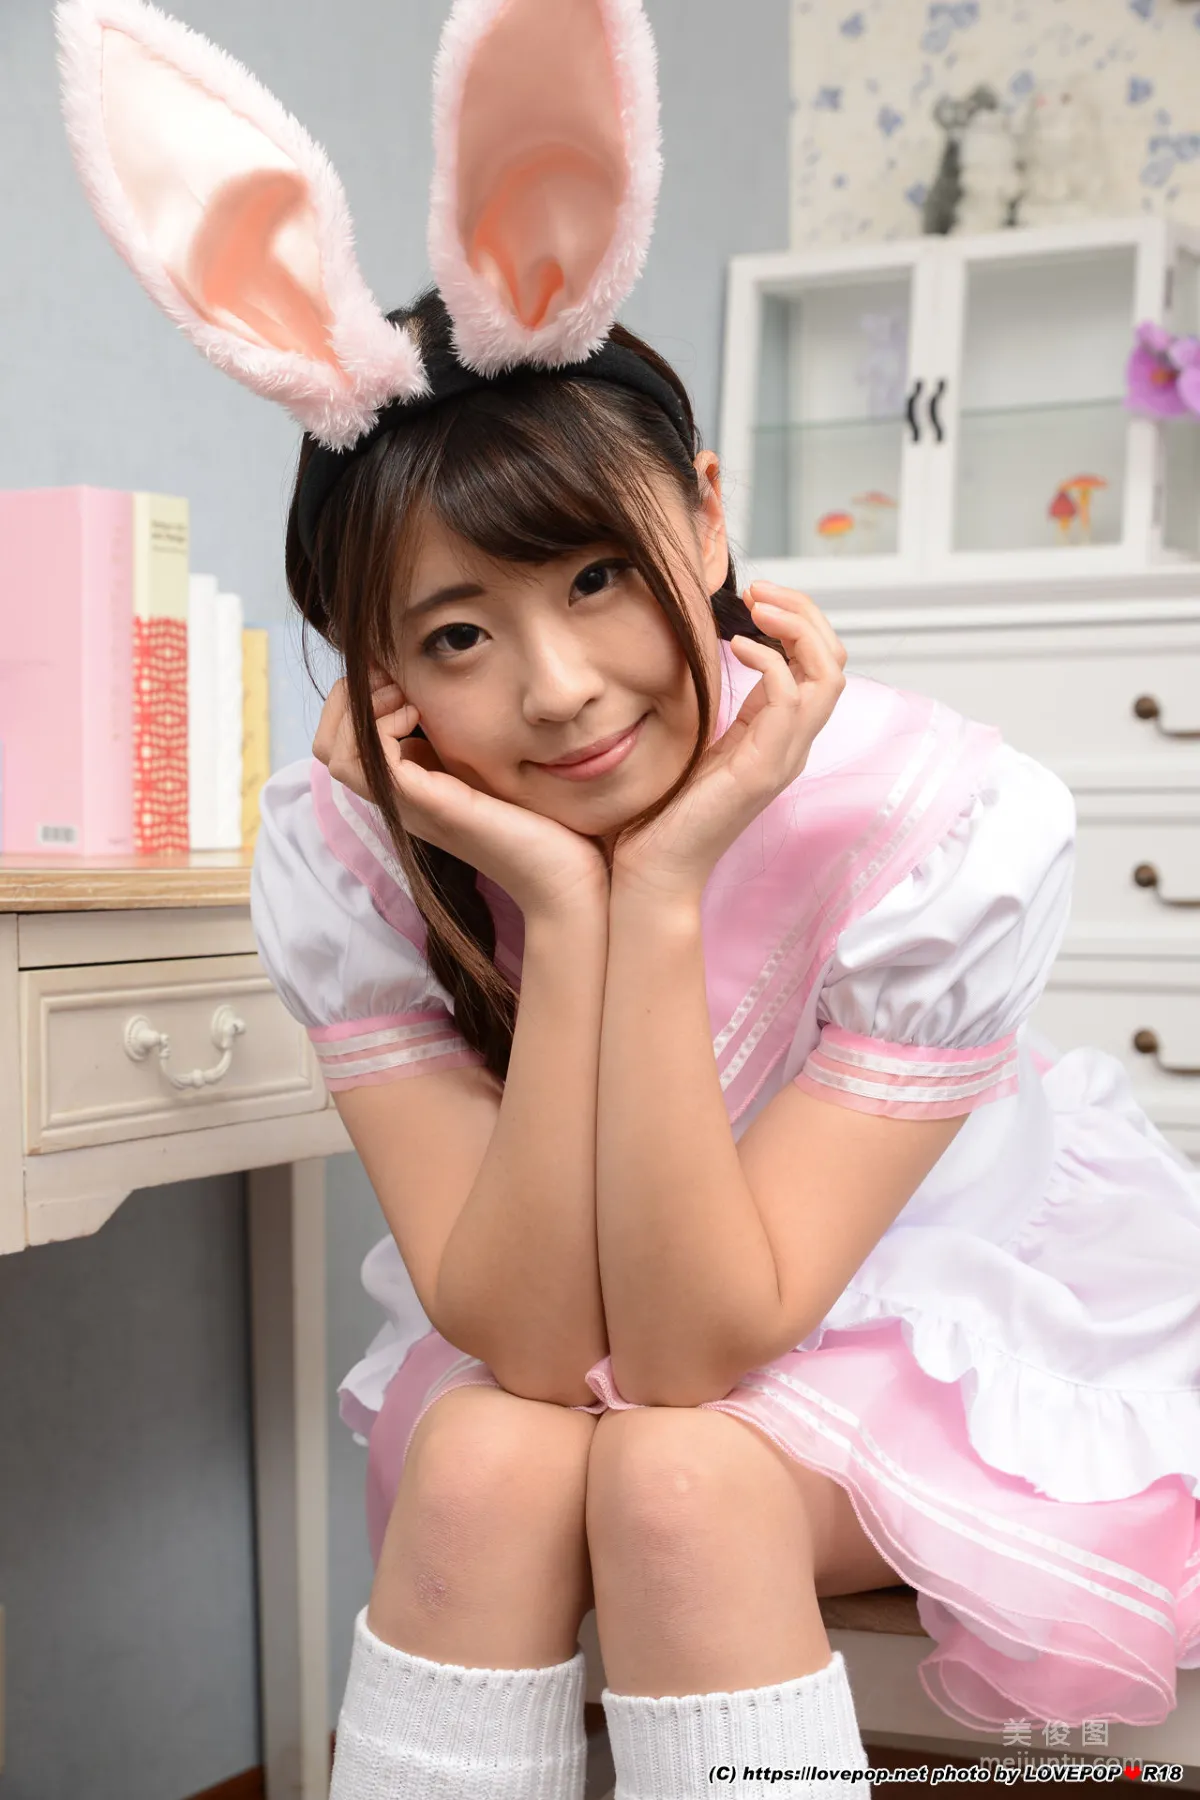 [LOVEPOP] Special Maid Collection - さとう愛理 Photoset 046